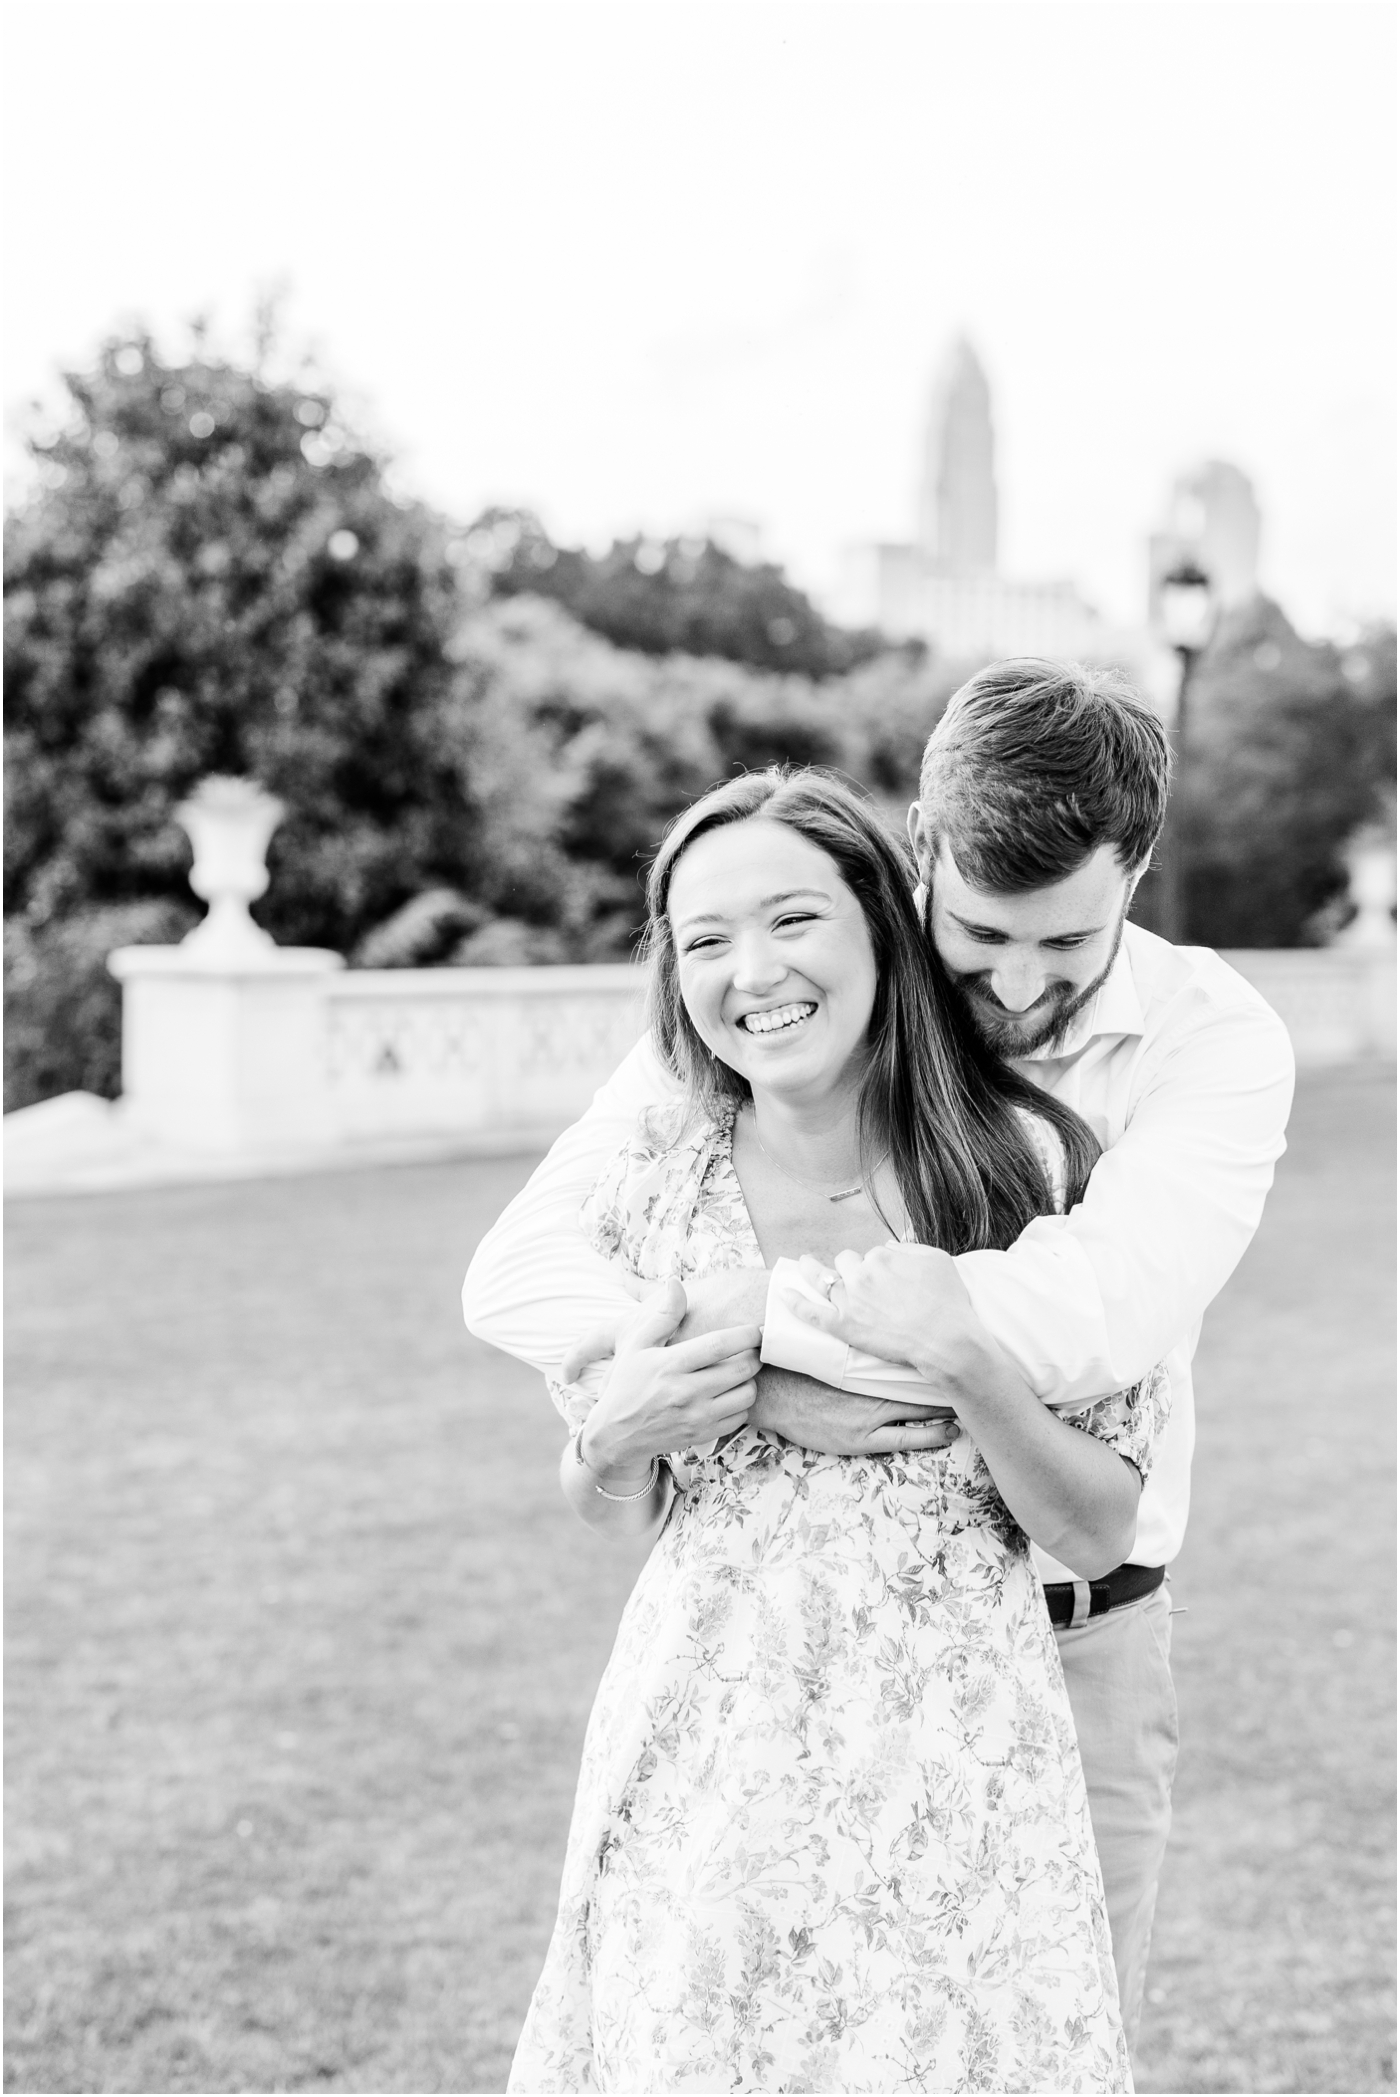 Midtown Park Engagement Session in Charlotte NC